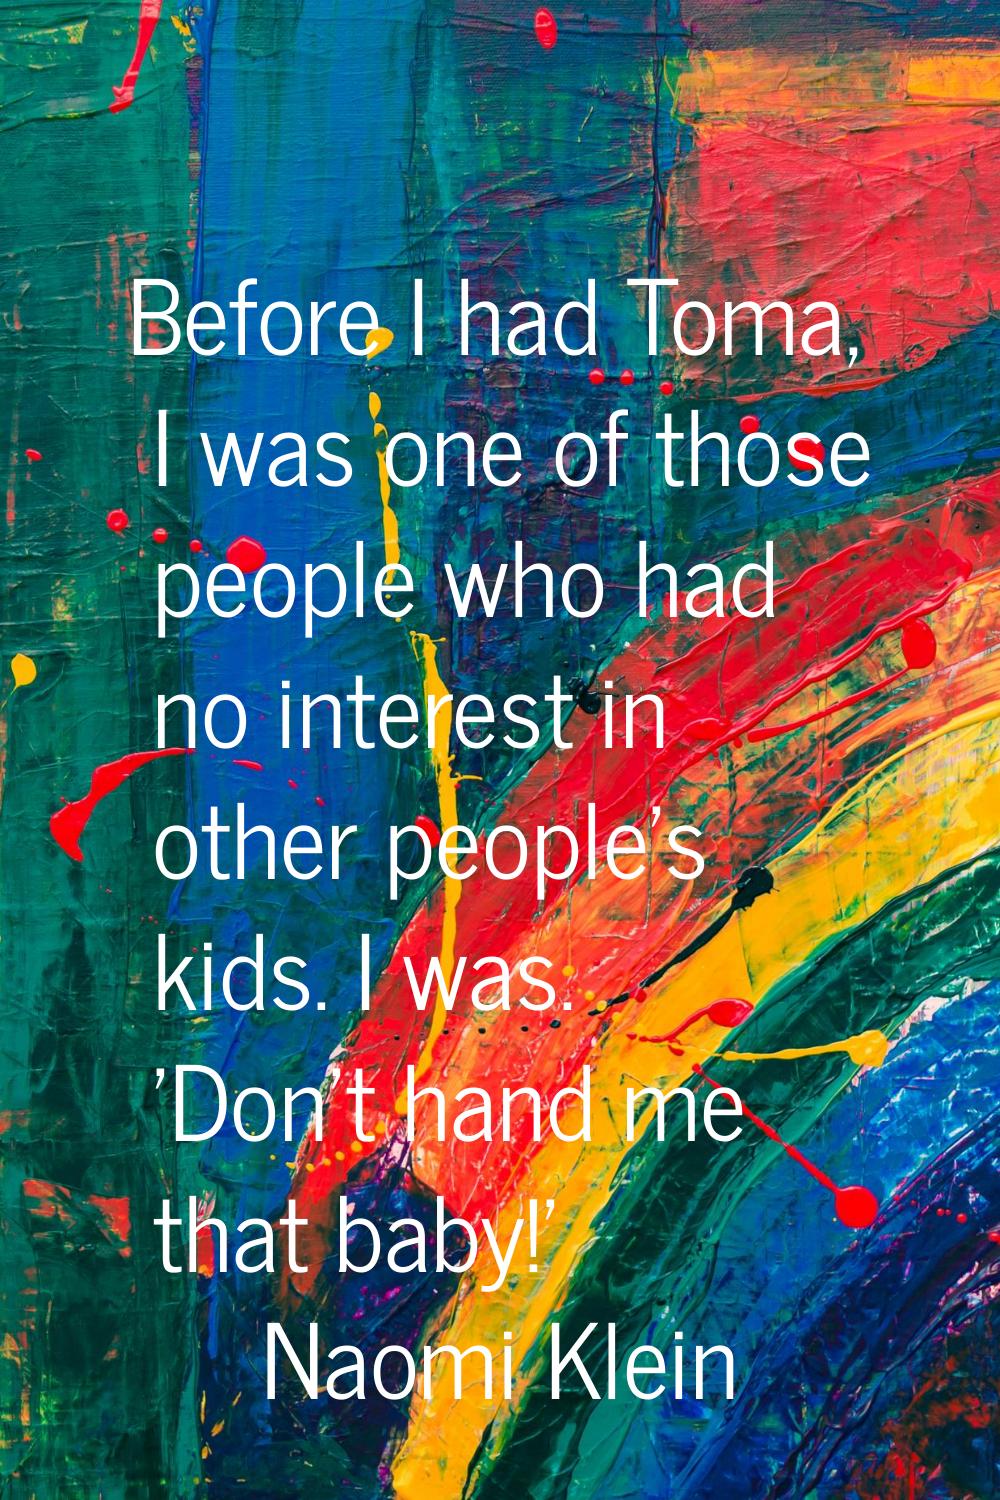 Before I had Toma, I was one of those people who had no interest in other people's kids. I was. 'Do